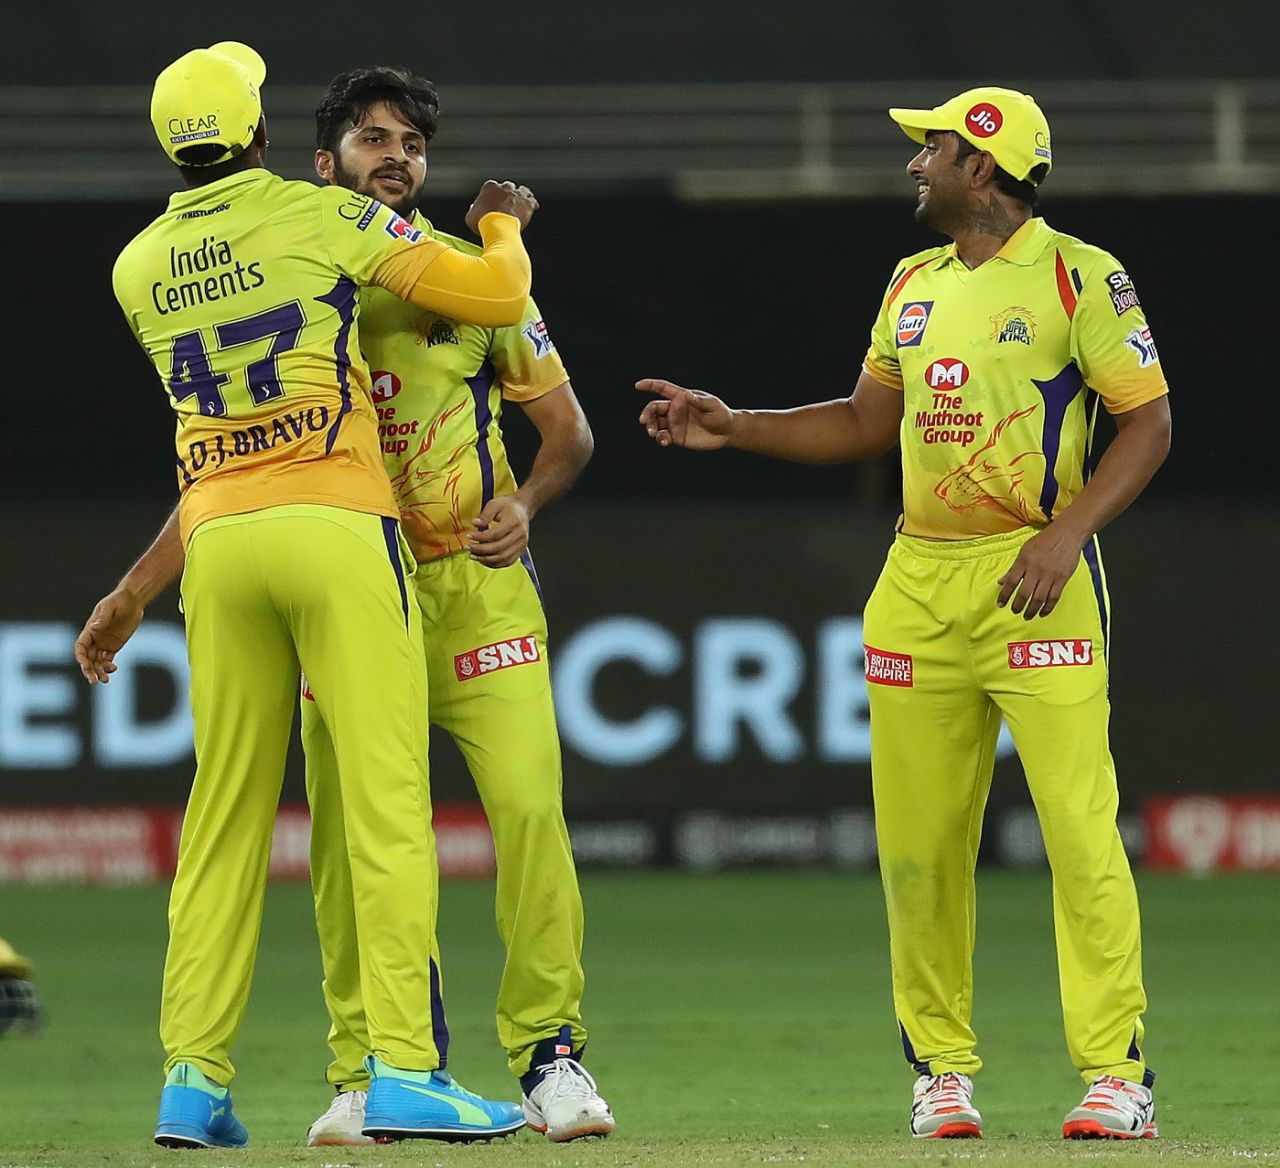 Shardul Thakur is congratulated after his double-wicket over, Royal Challengers Bangalore vs Chennai Super Kings, IPL 2020, Dubai, October 10, 2020